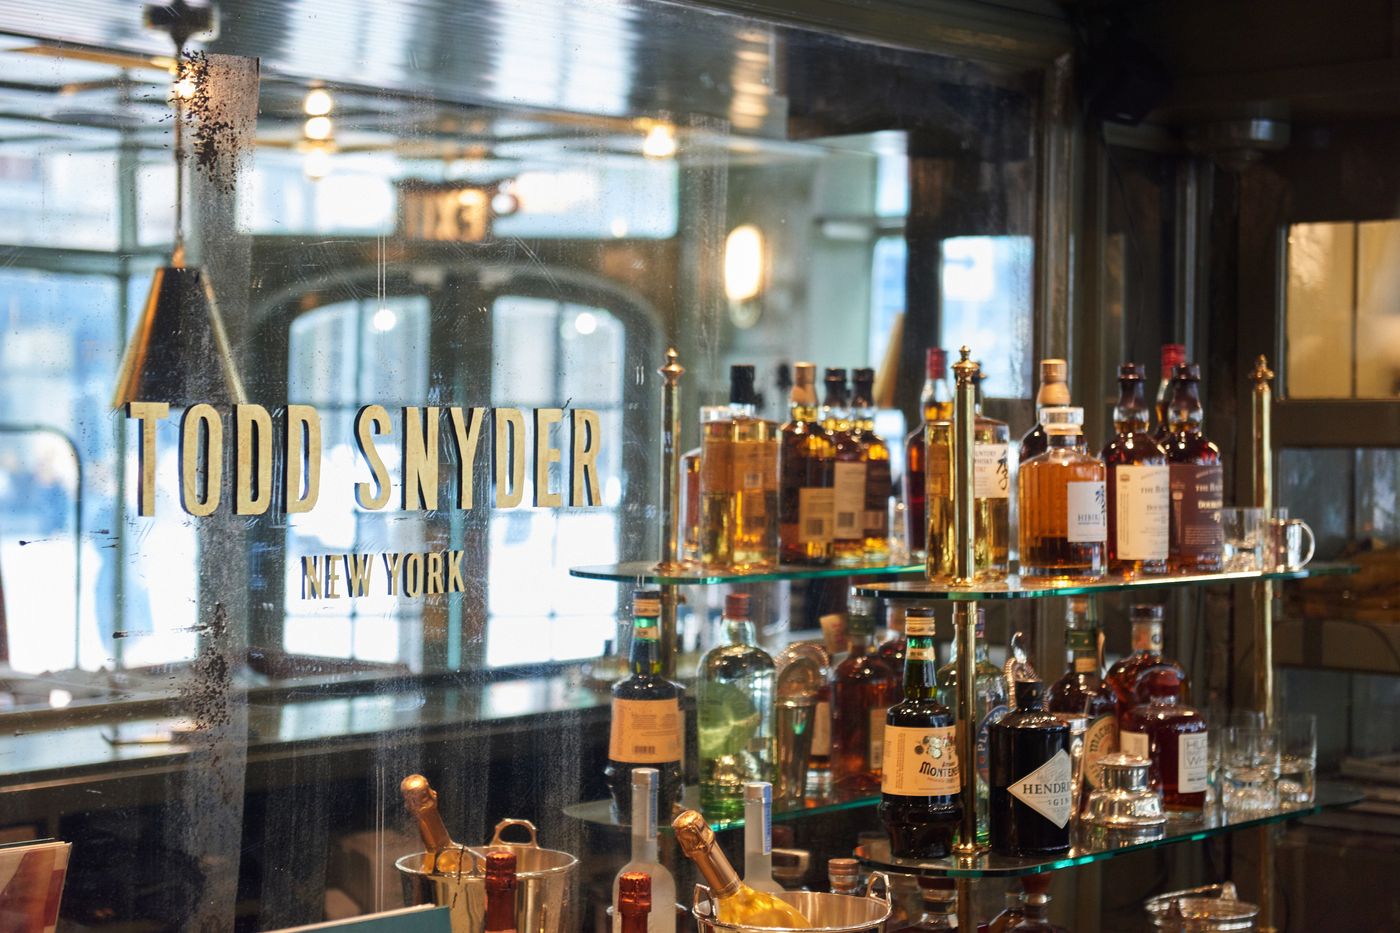 EXCLUSIVE: Todd Snyder to Open at J. Crew Liquor Store